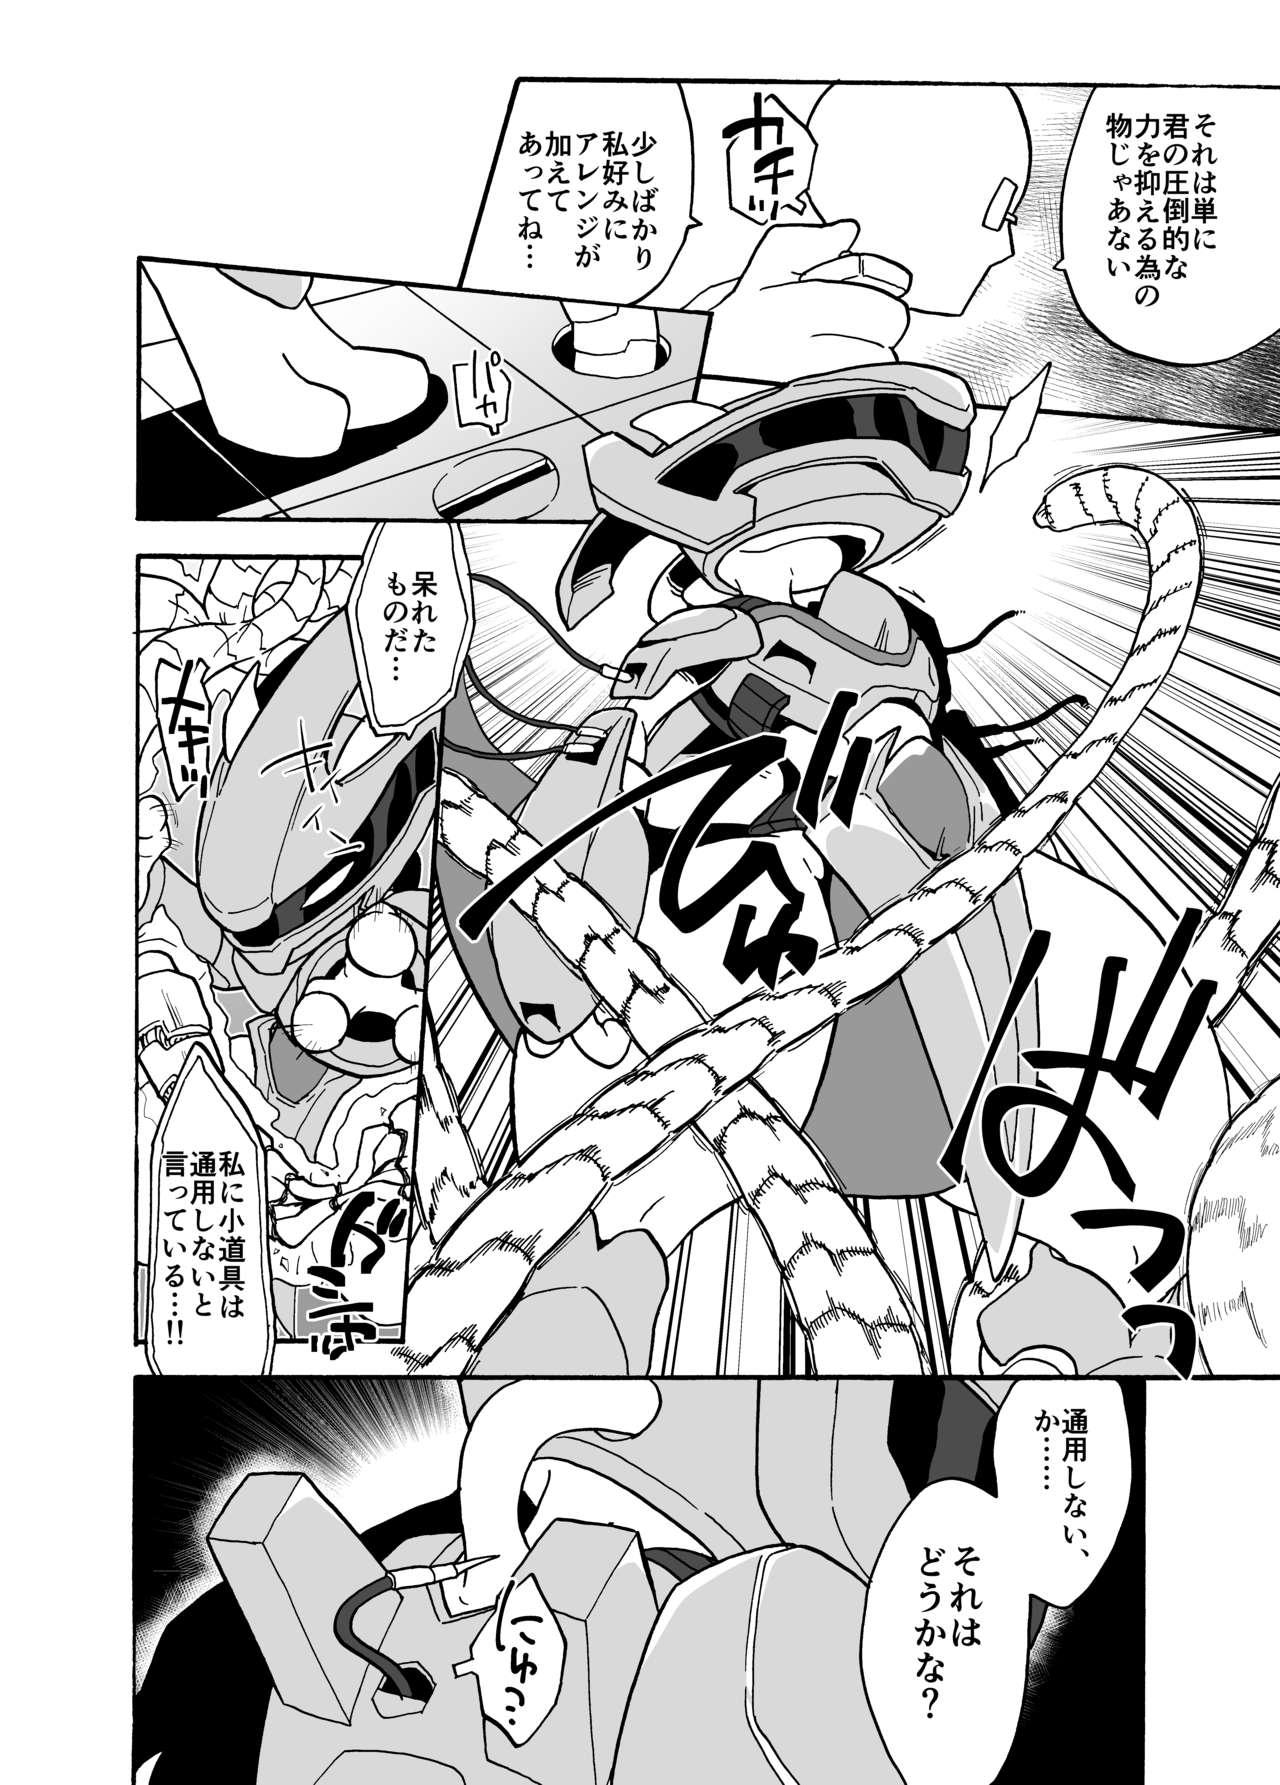 Abg Mewtwo - Pokemon | pocket monsters New - Page 2